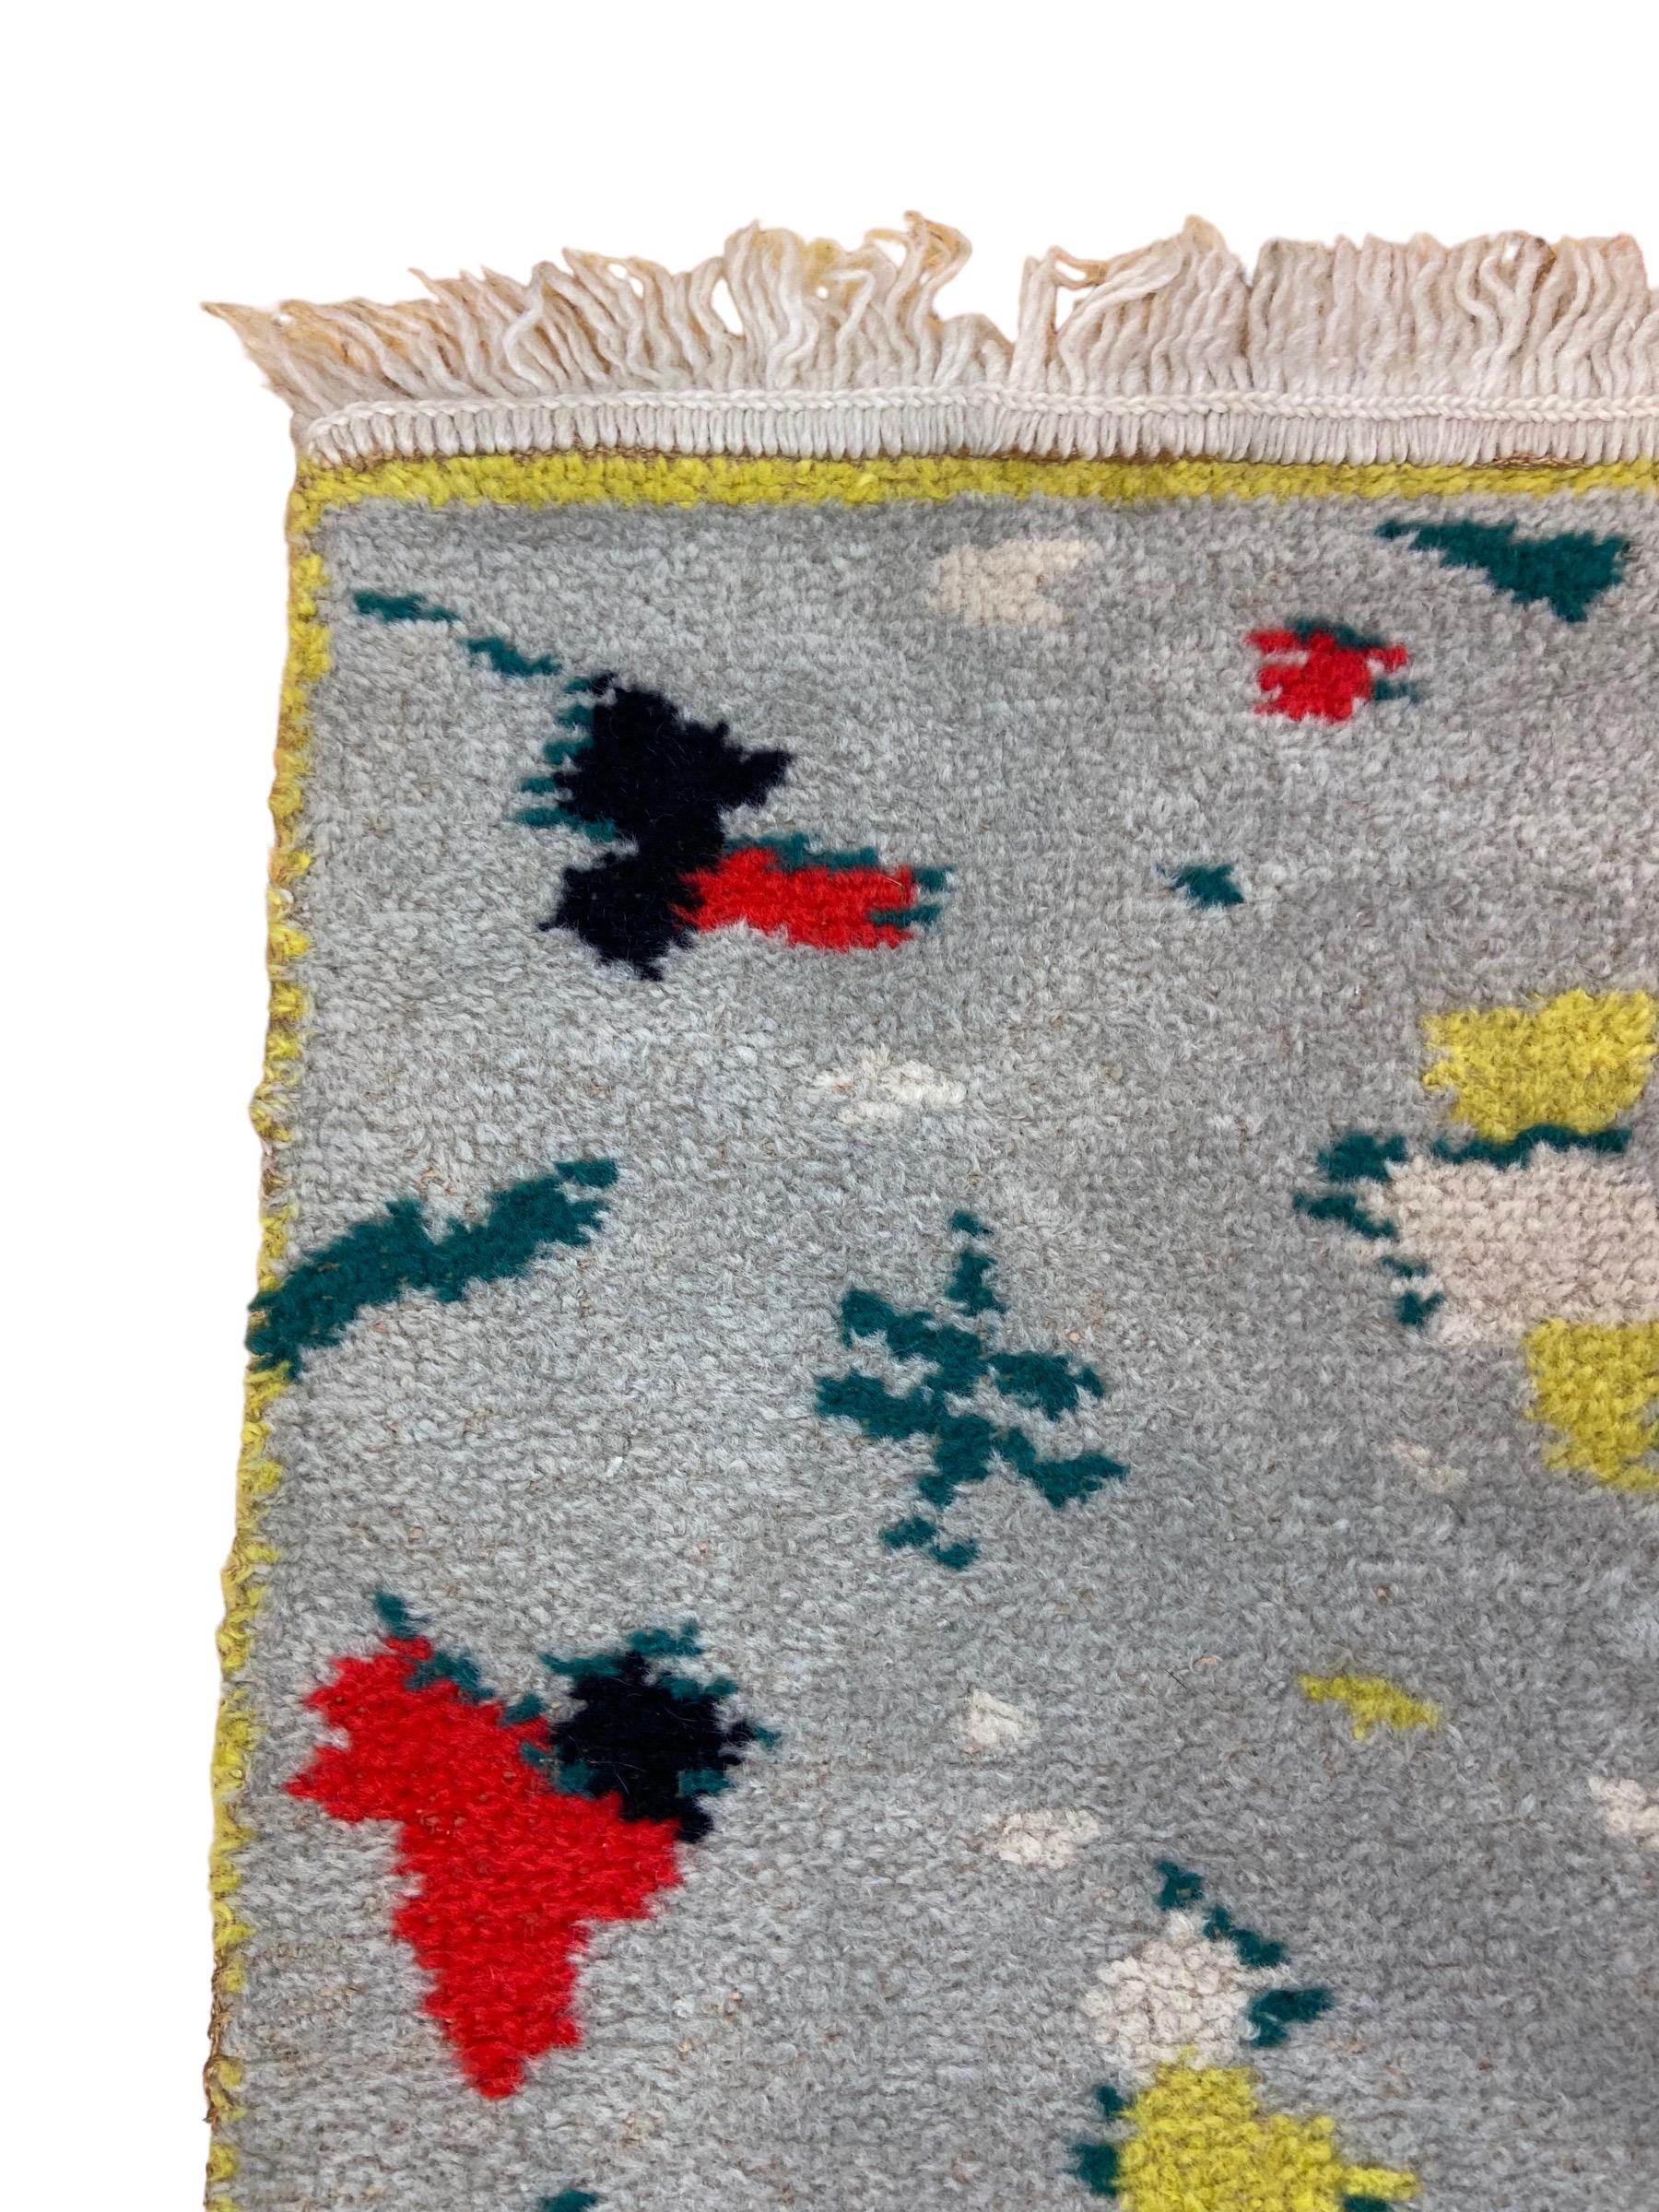 Small wool carpet in the style of “De Stijl”. Made in The Netherlands in the 1920s.

110 cm x 50 cm.